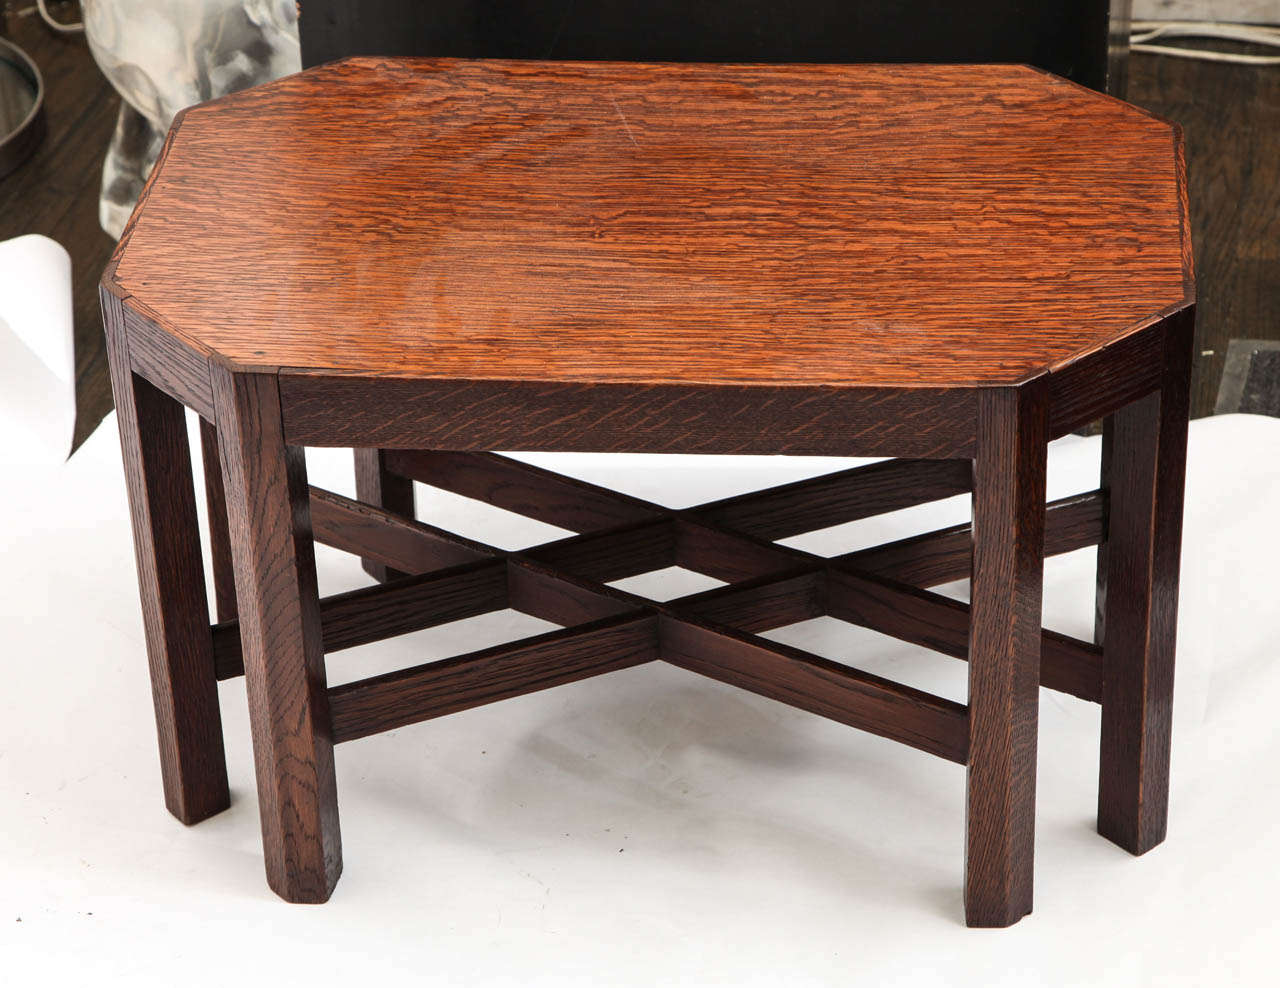 A 1920s architectural wood table.